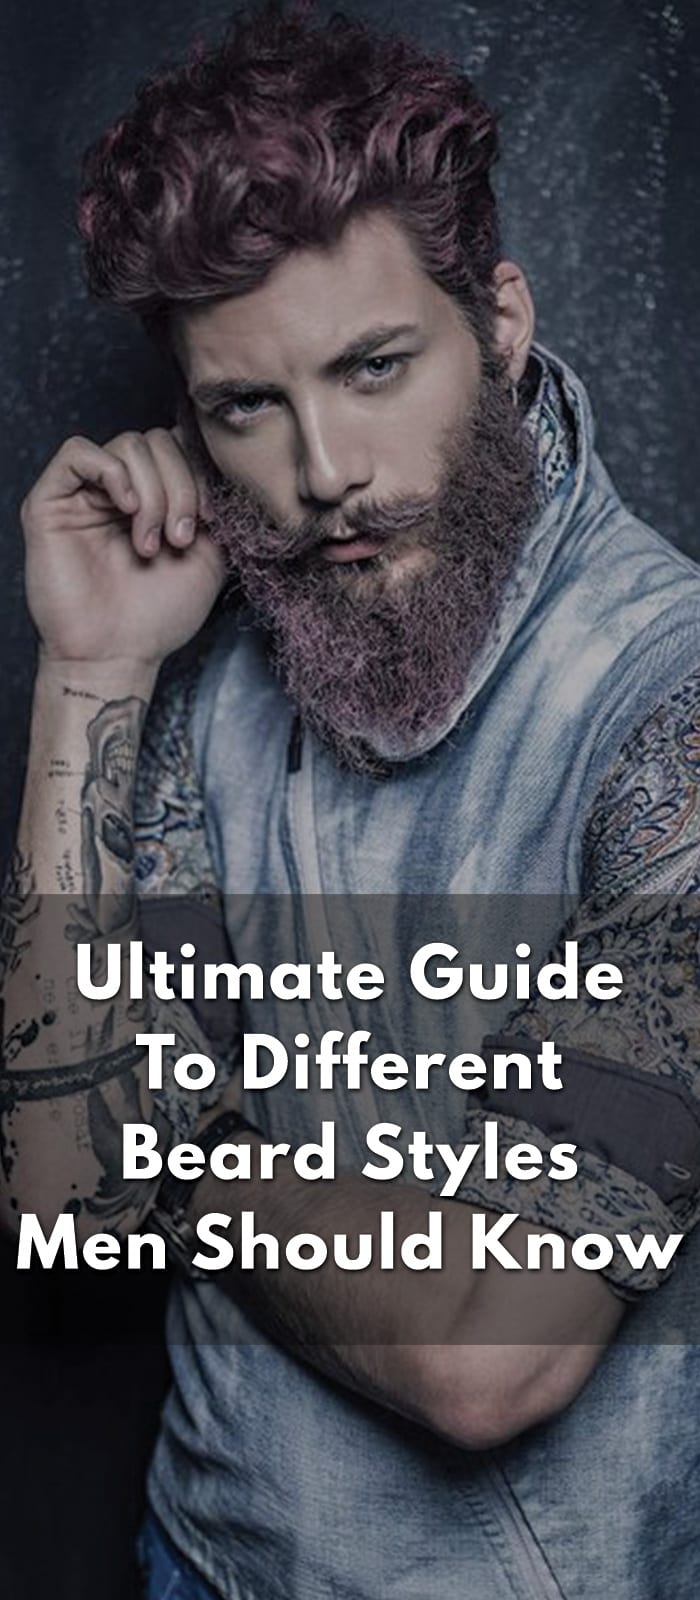 Ultimate-Guide-To-Different-Beard-Styles-Men-Should-Know